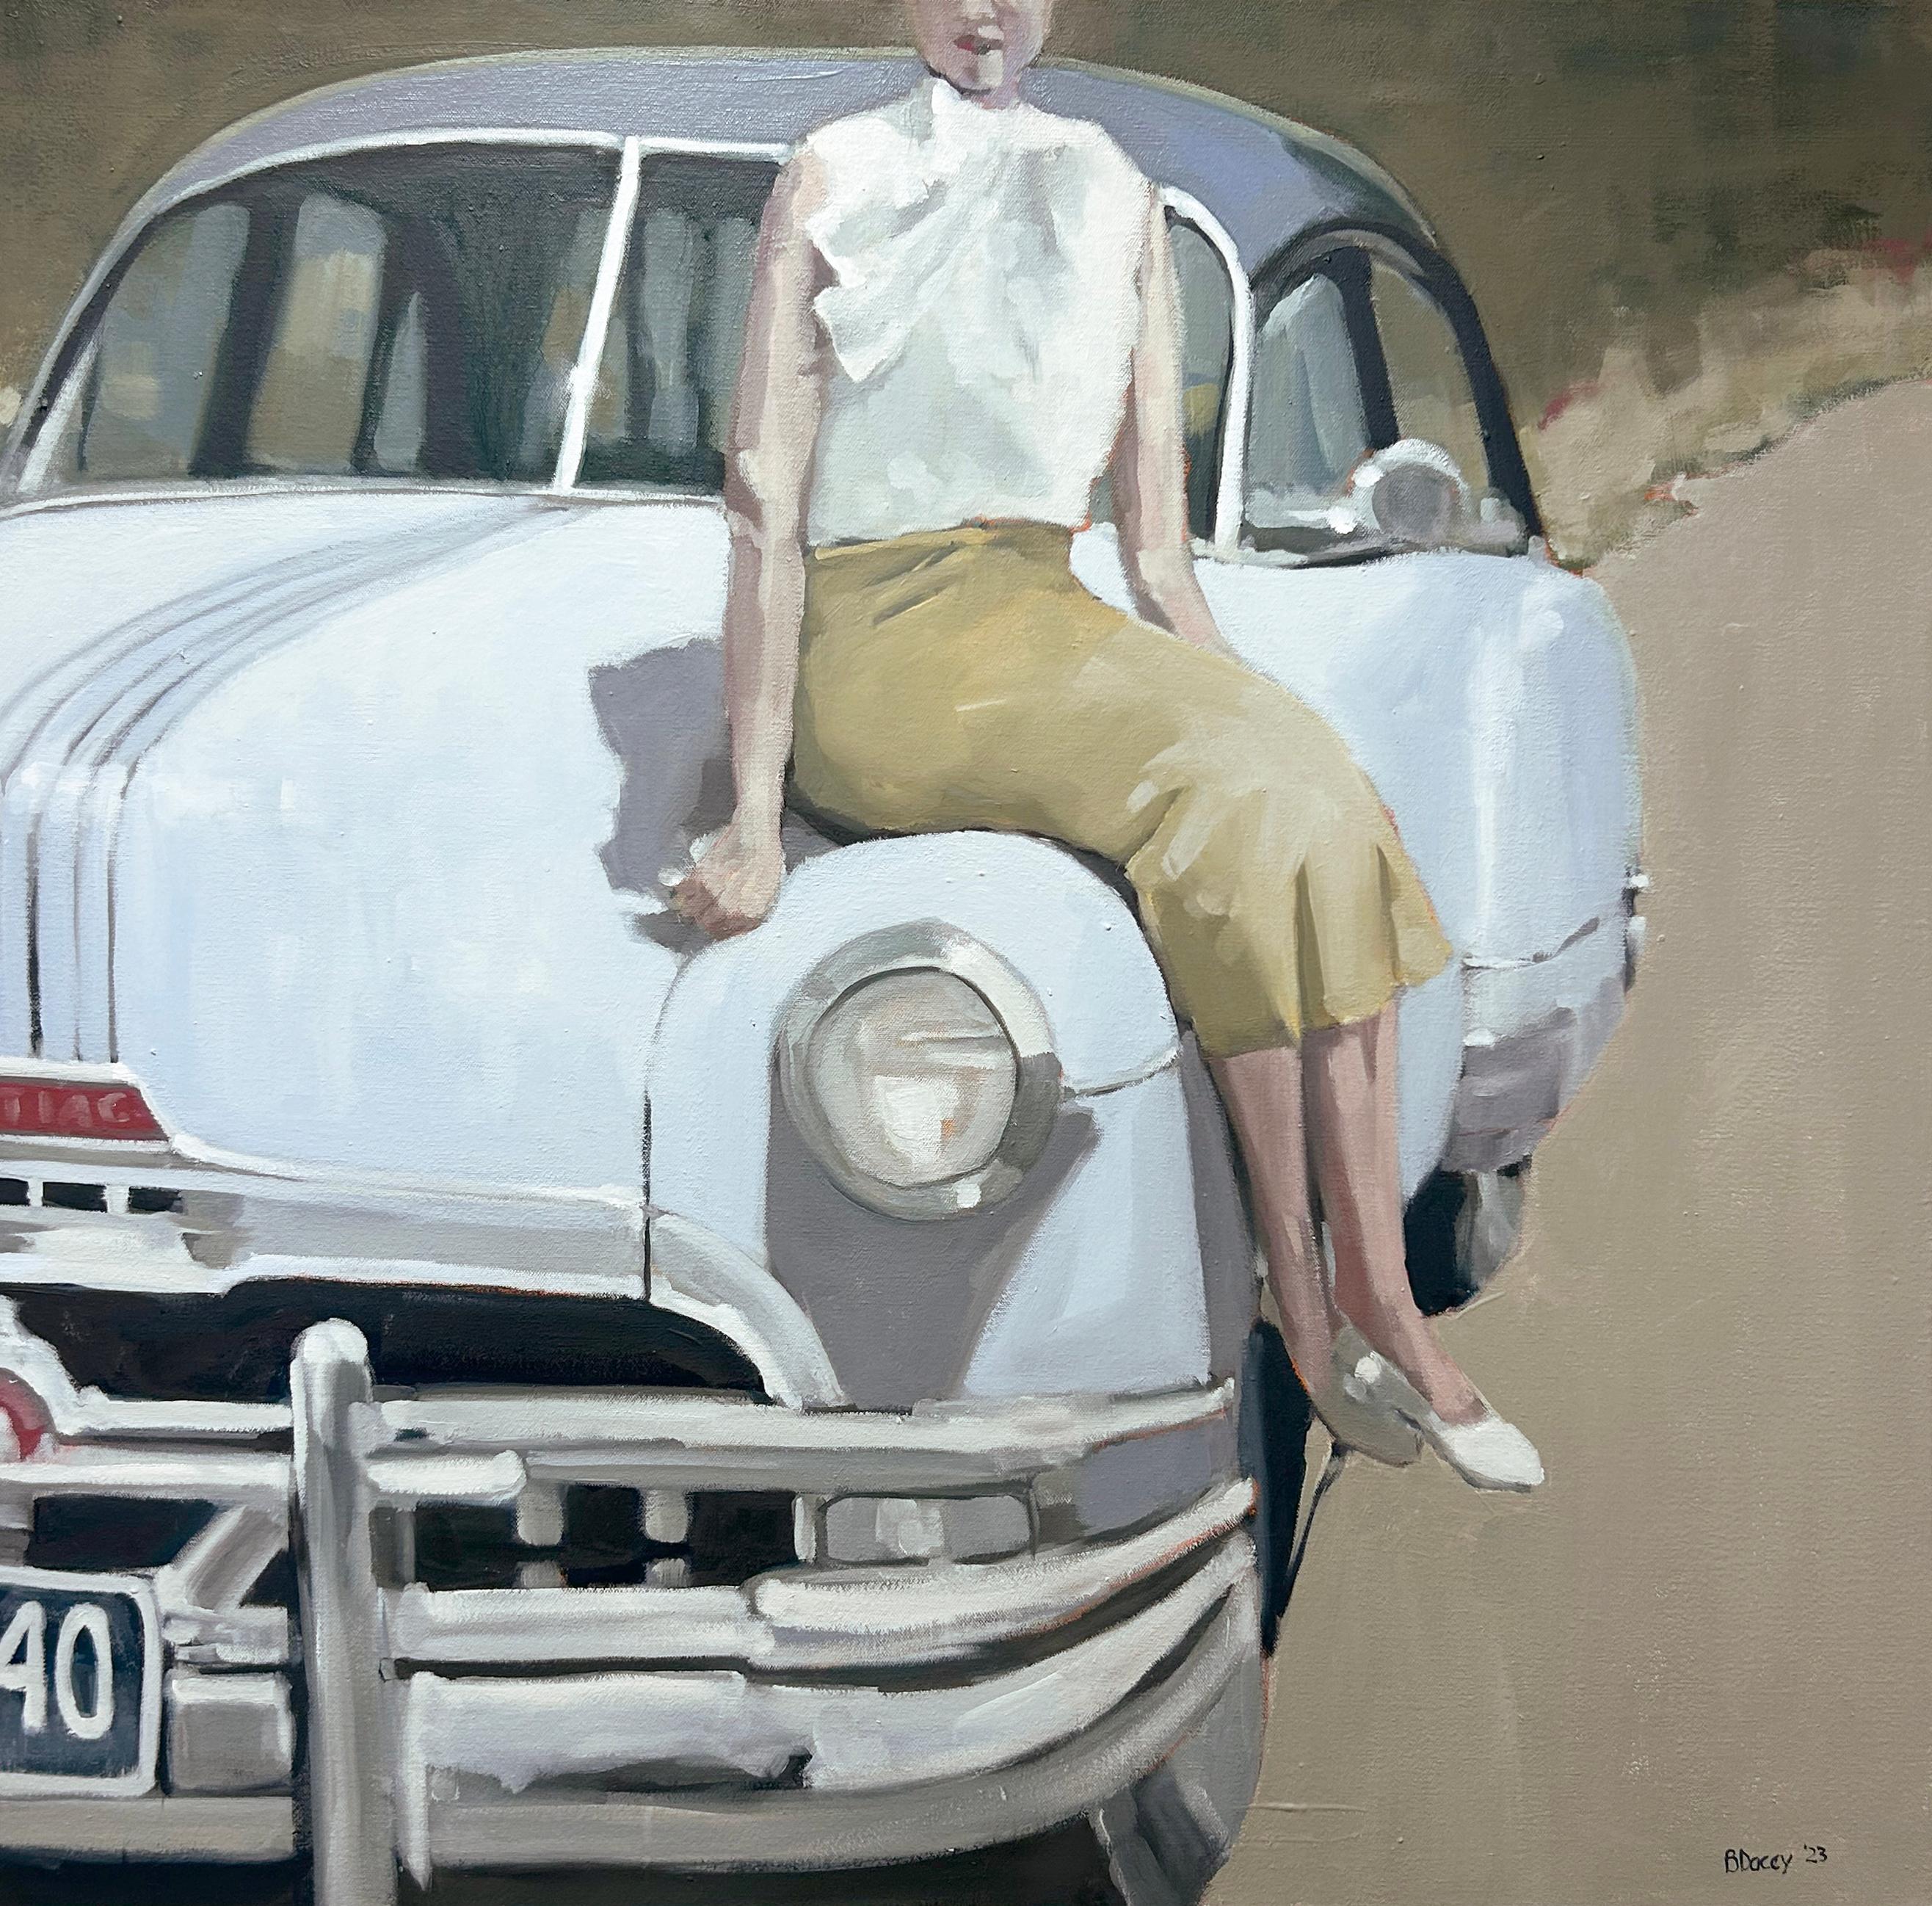 Beth Dacey's "Woman with Blue Car" is a 36x36 oil painting on canvas of a woman in a ochre colored skirt, white blouse, and heels.  She is posed next to a baby blue vintage automobile.

Dacey is inspired by vintage, black and white, family